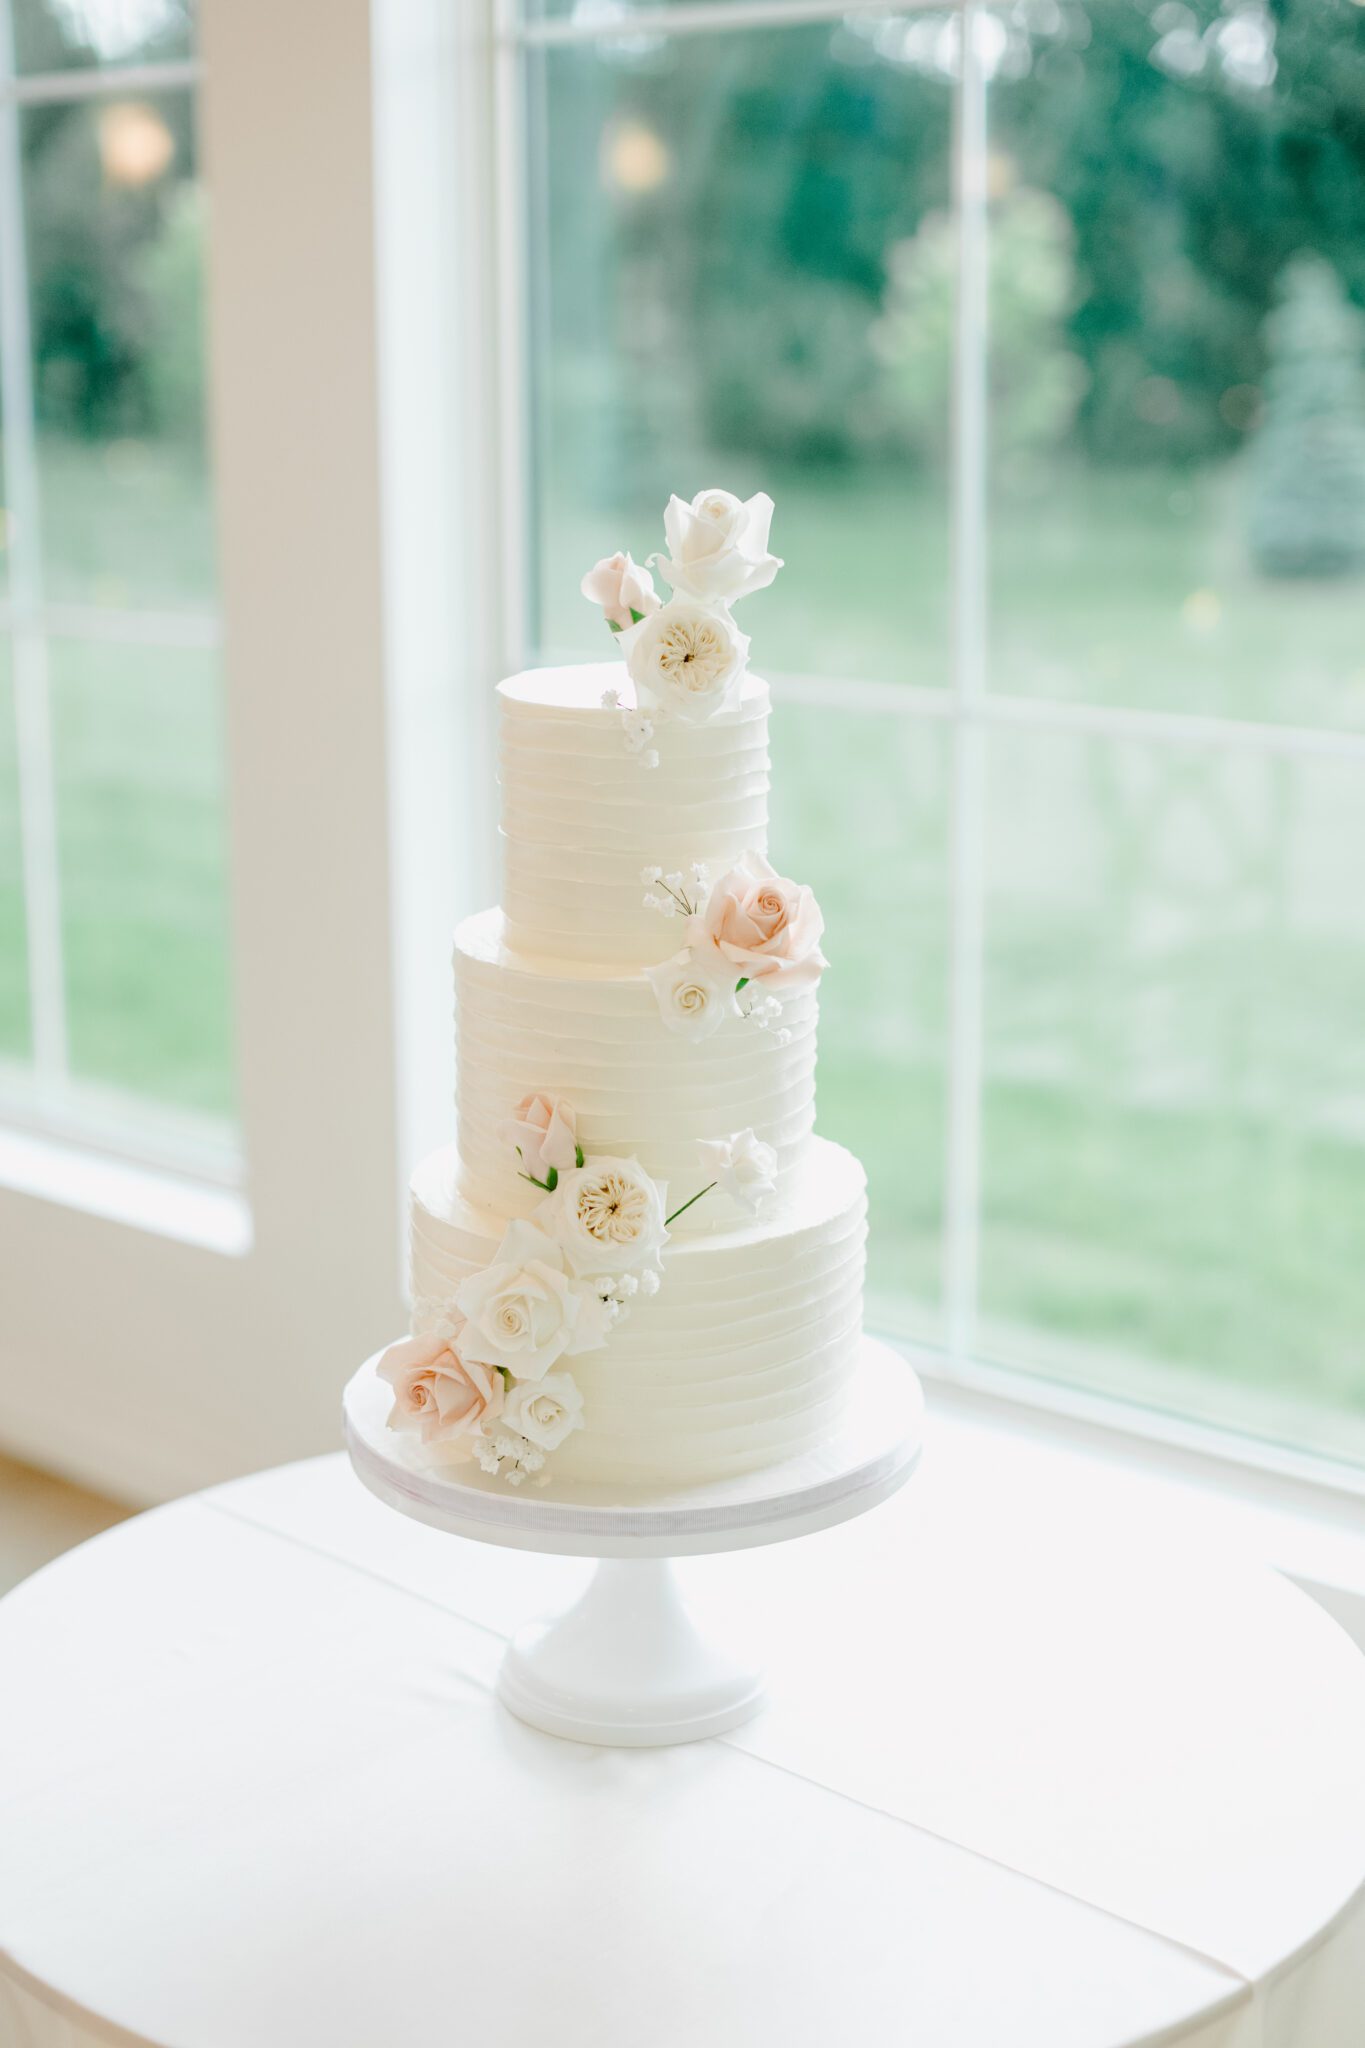 Beautiful classic three-tiered white wedding cake adorned with white and blush roses, created by Brianne Gabrielle Cakes.